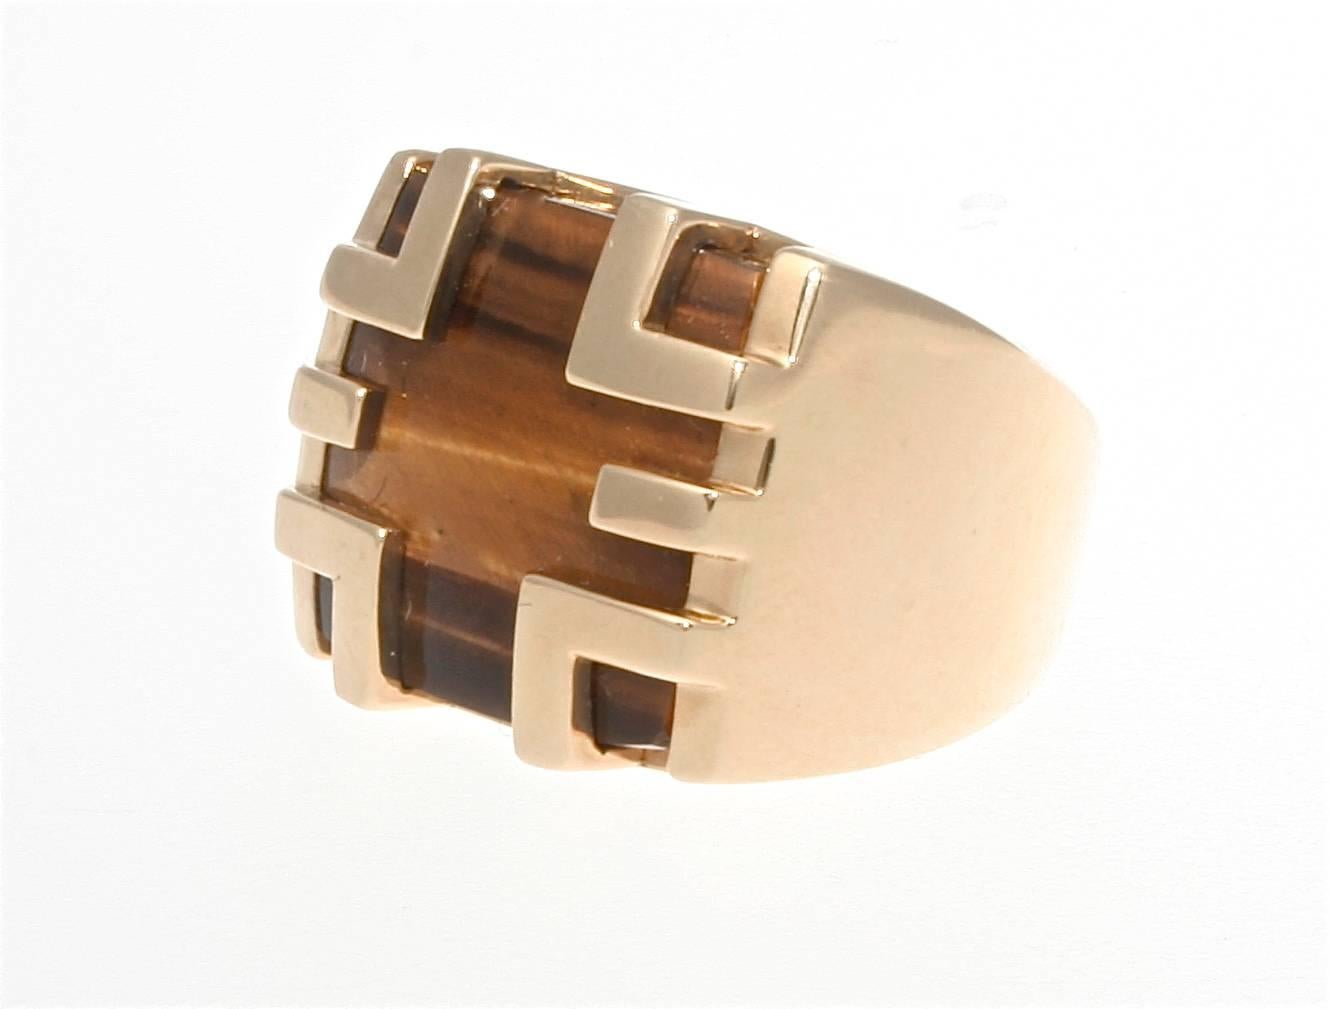 An unusual design from Cartier featuring tigers eye which displays a variety of brown hues. The 18k yellow gold has been fashioned to cage in the tigers eye, displaying why Cartier developed the name of this ring. 

Signed Cartier.

Size 6